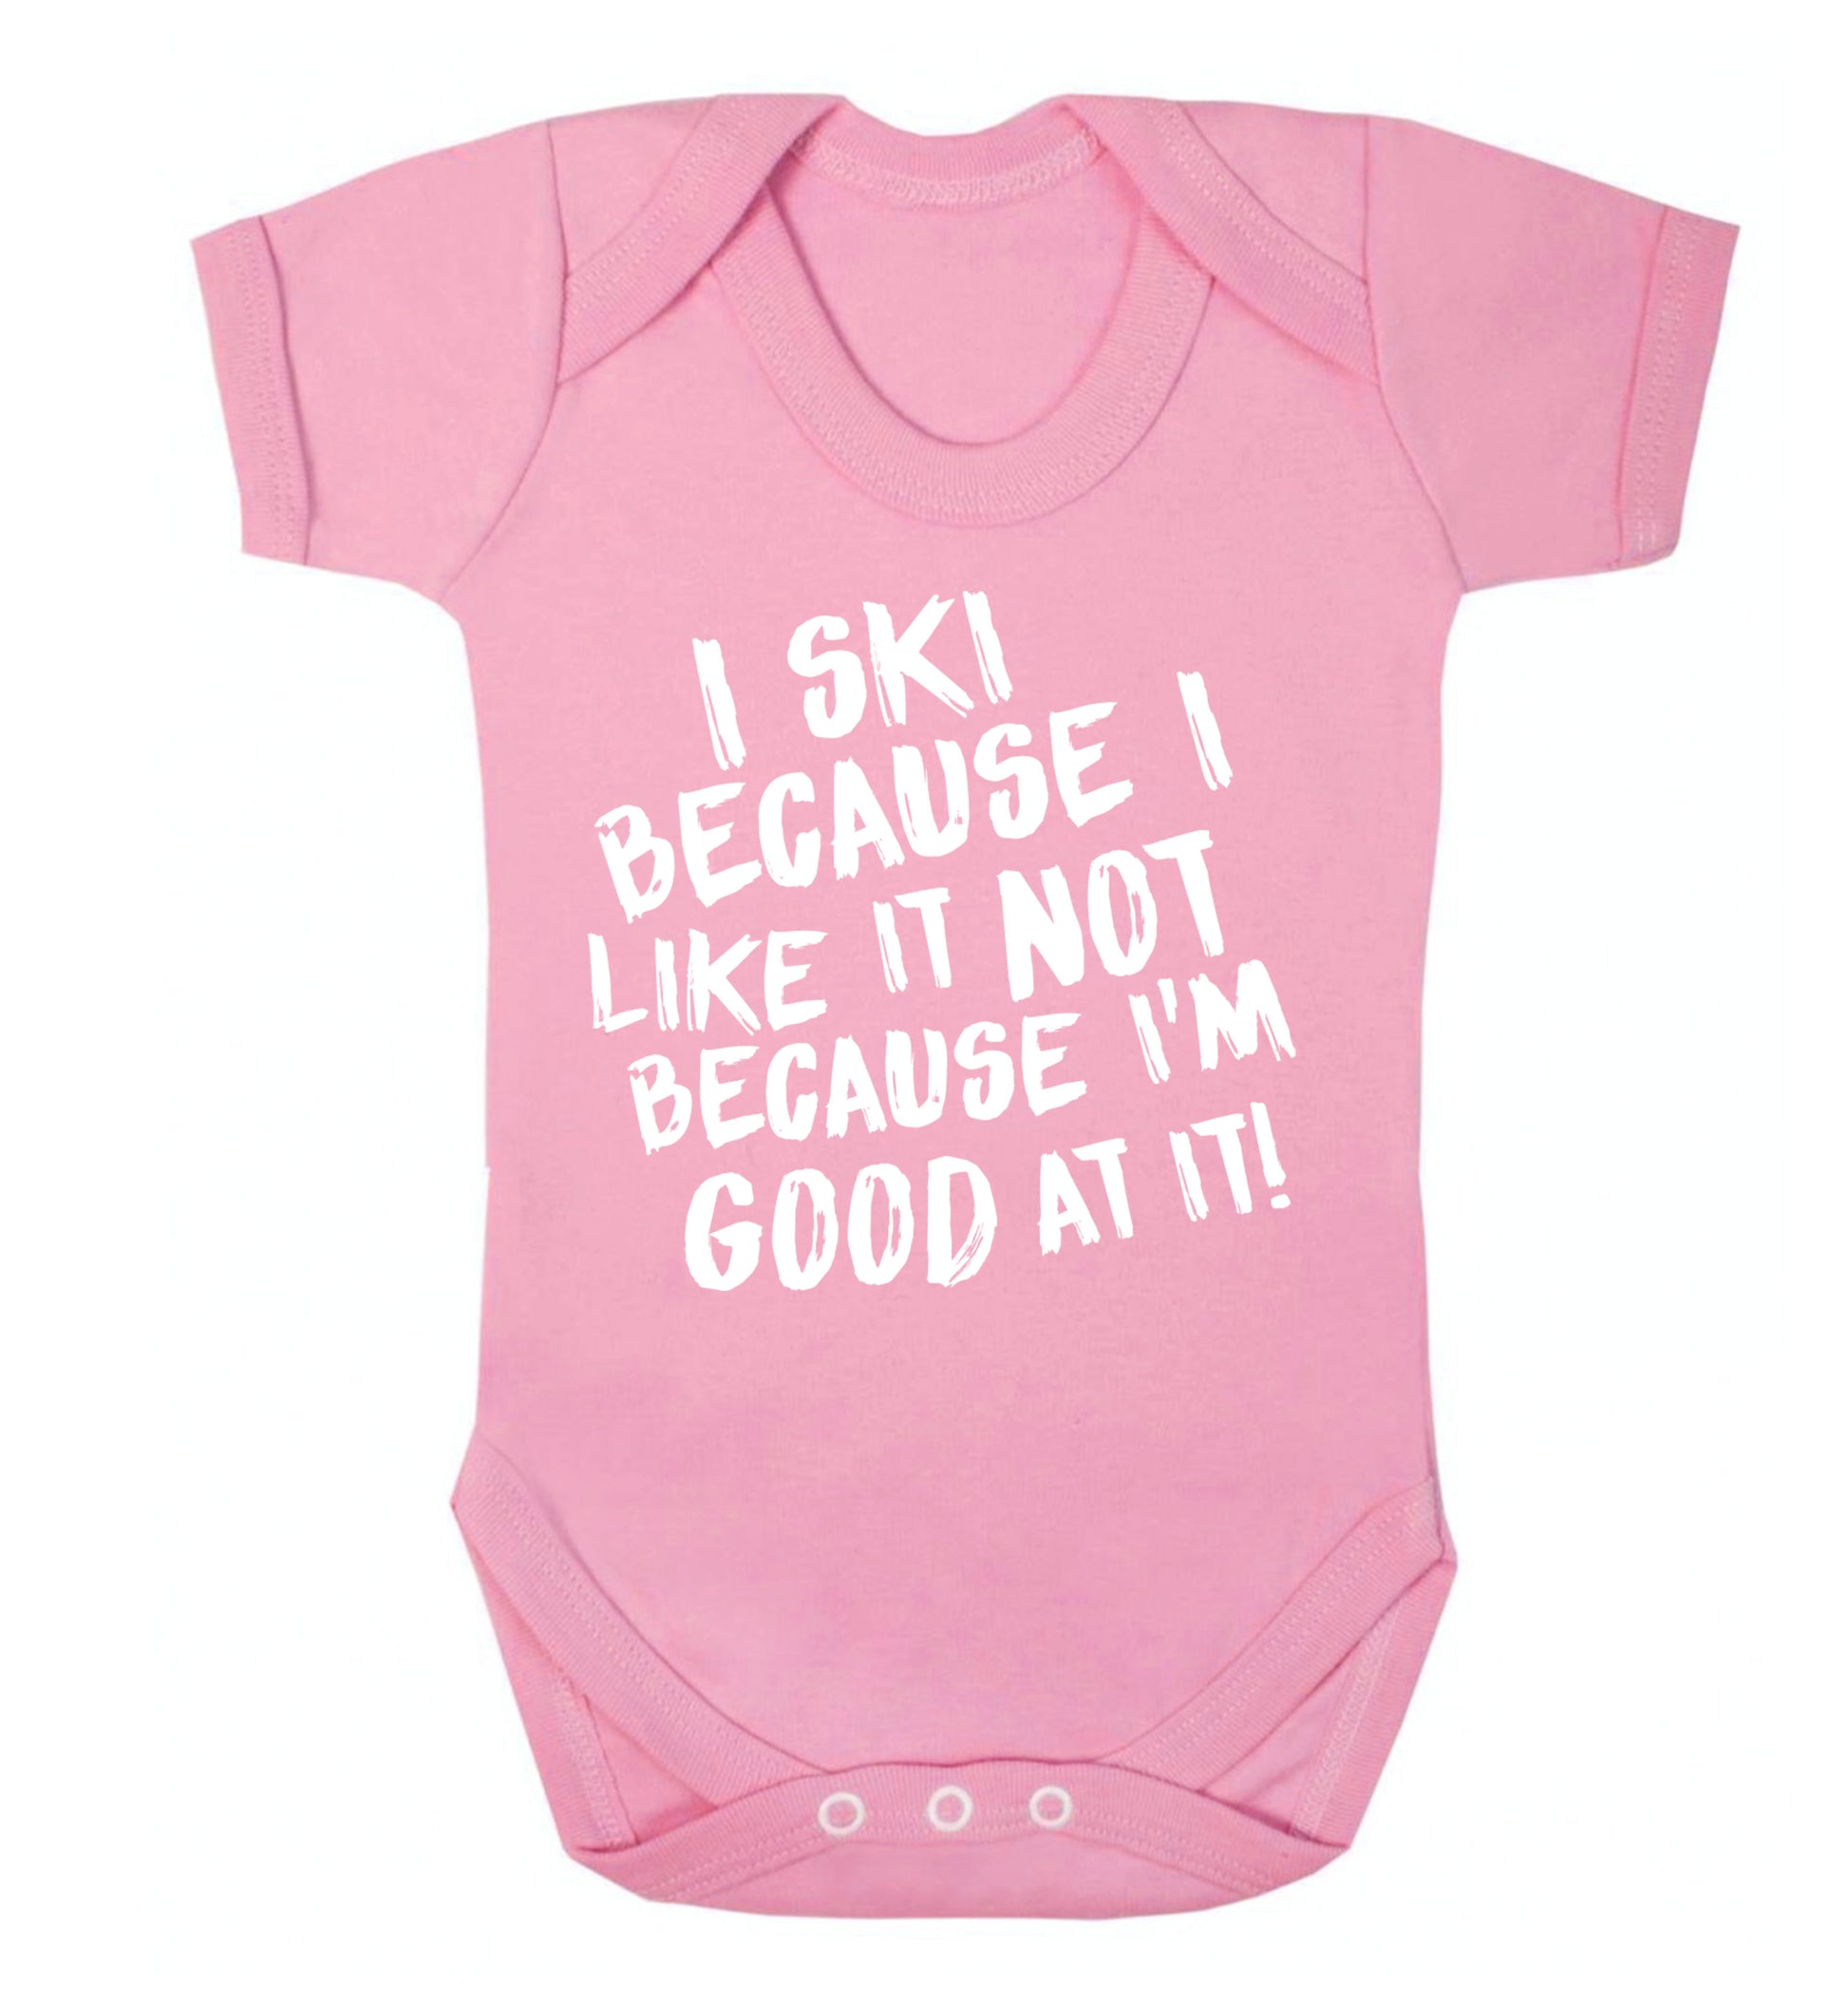 I ski because I like it not because I'm good at it Baby Vest pale pink 18-24 months